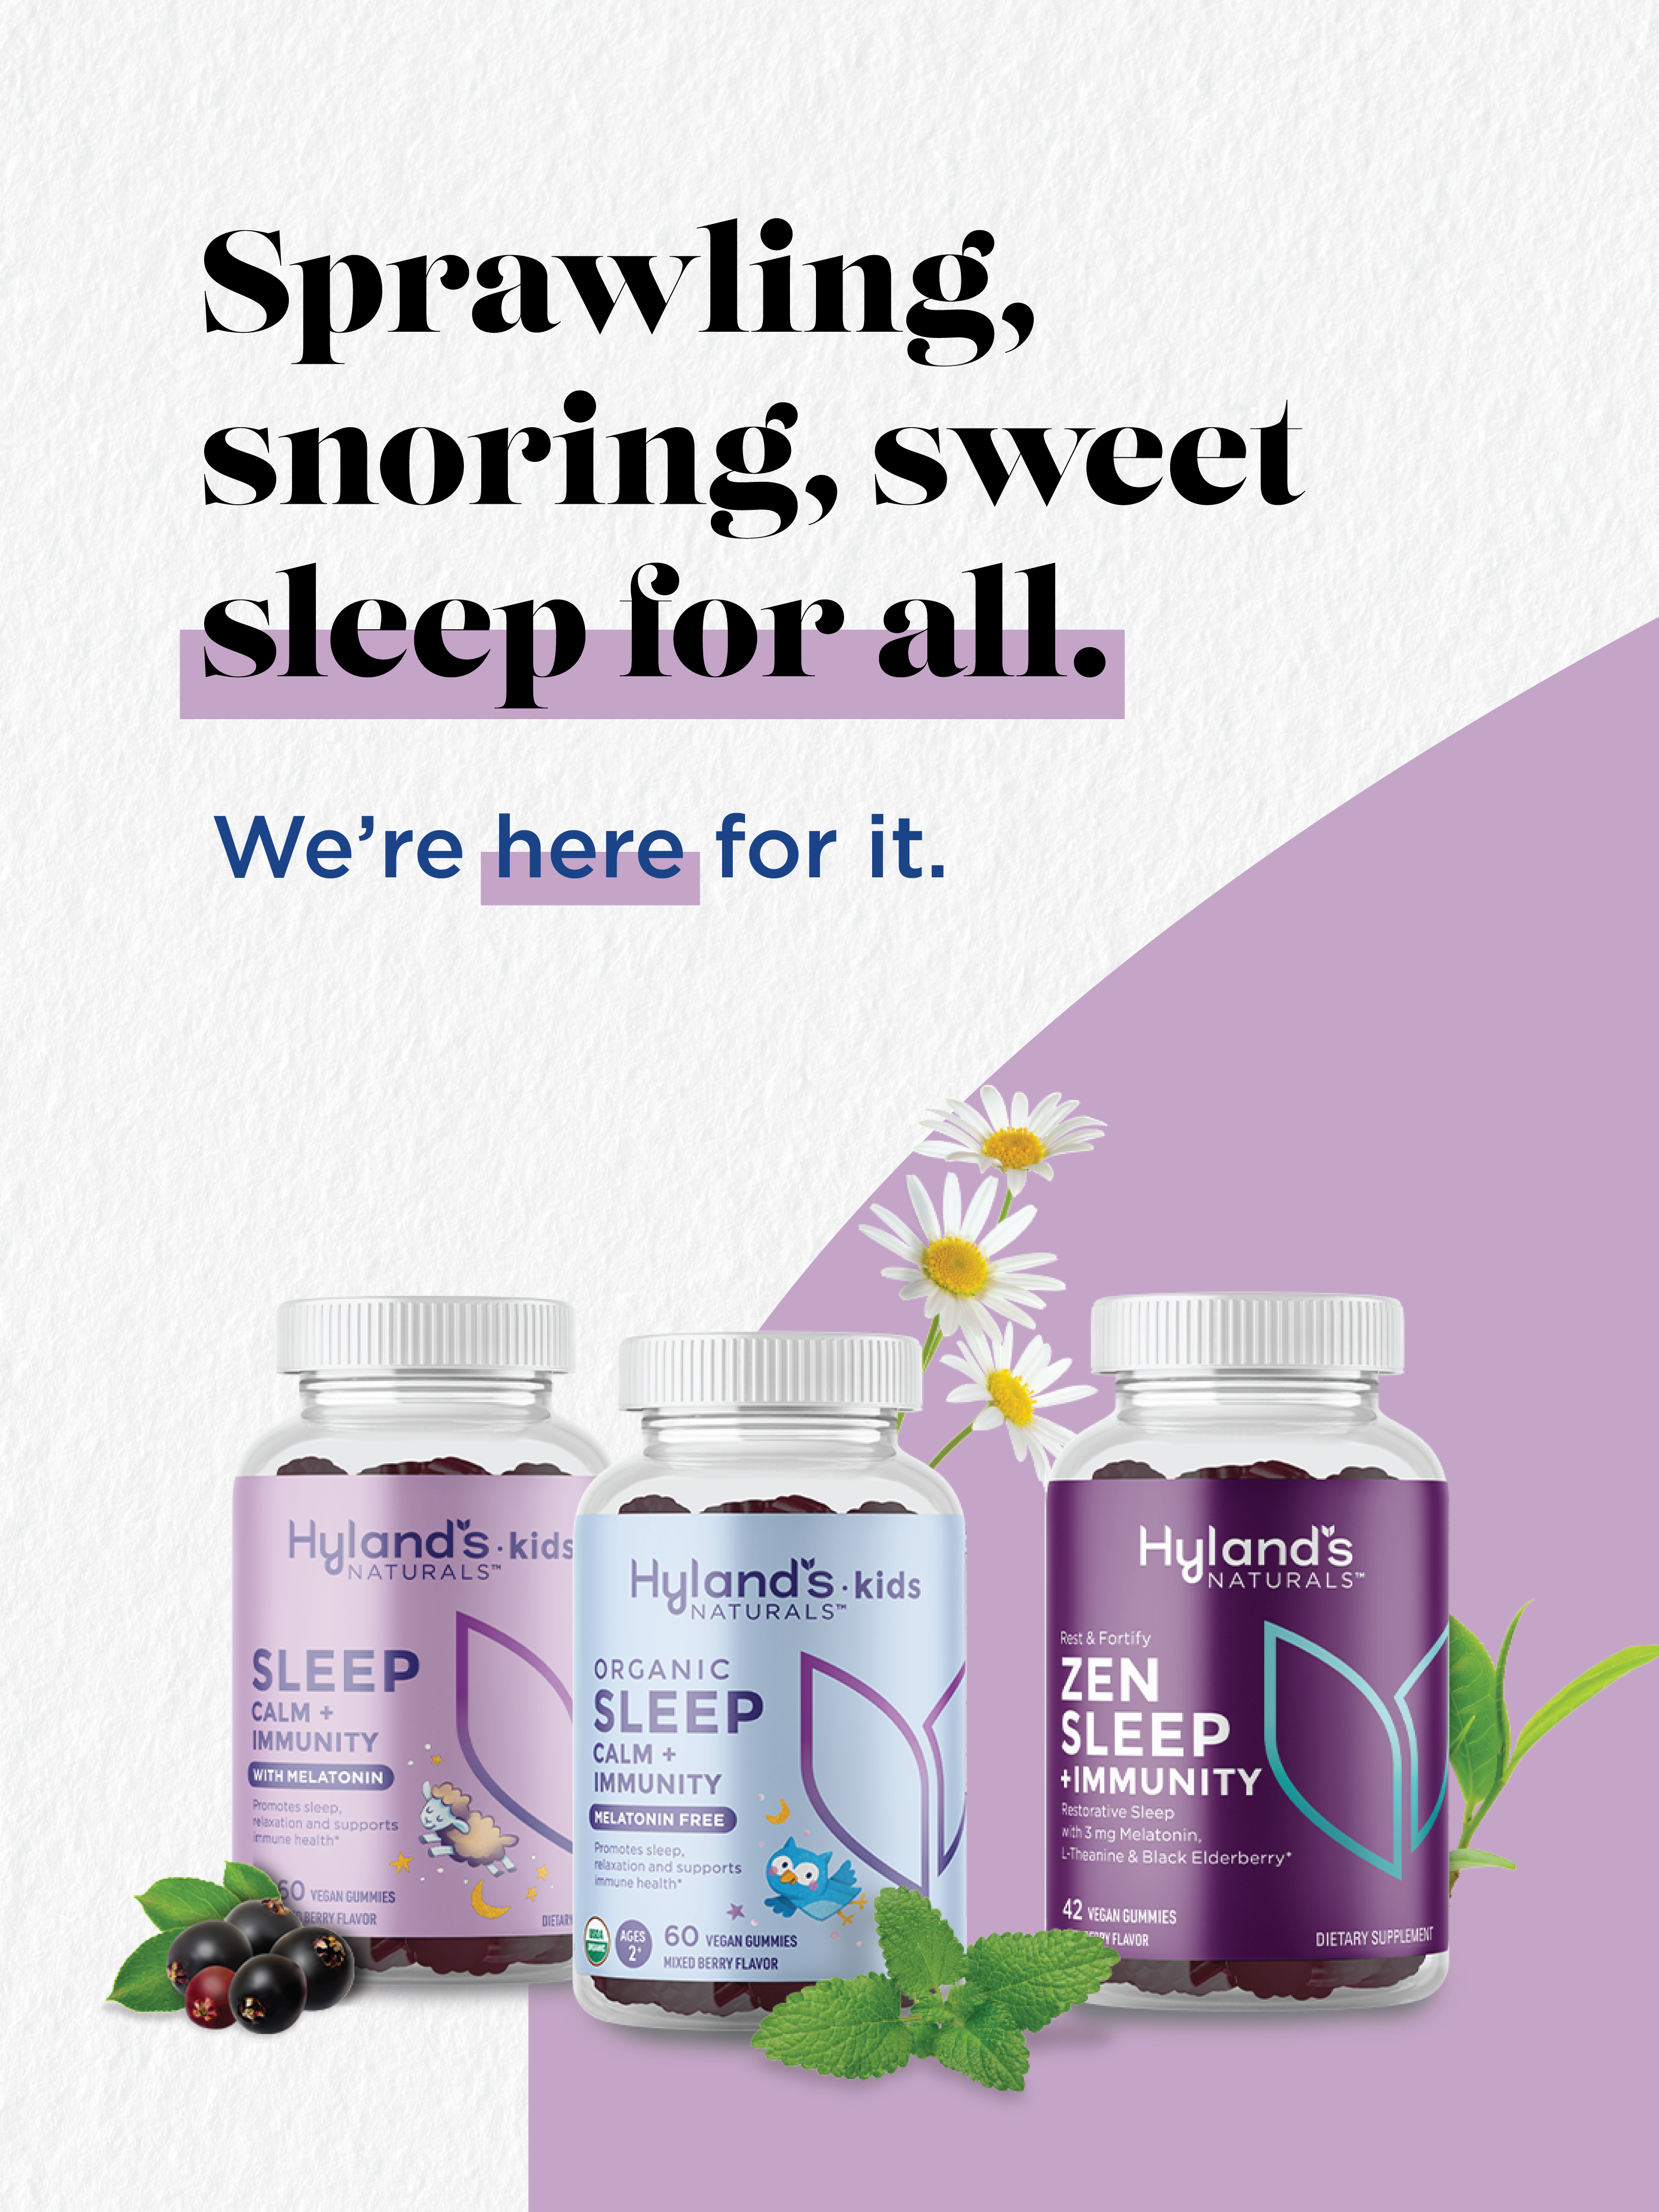 Sprawling, snoring, sweet sleep for all. We're here for it. Try one of our three sleep supplements. 